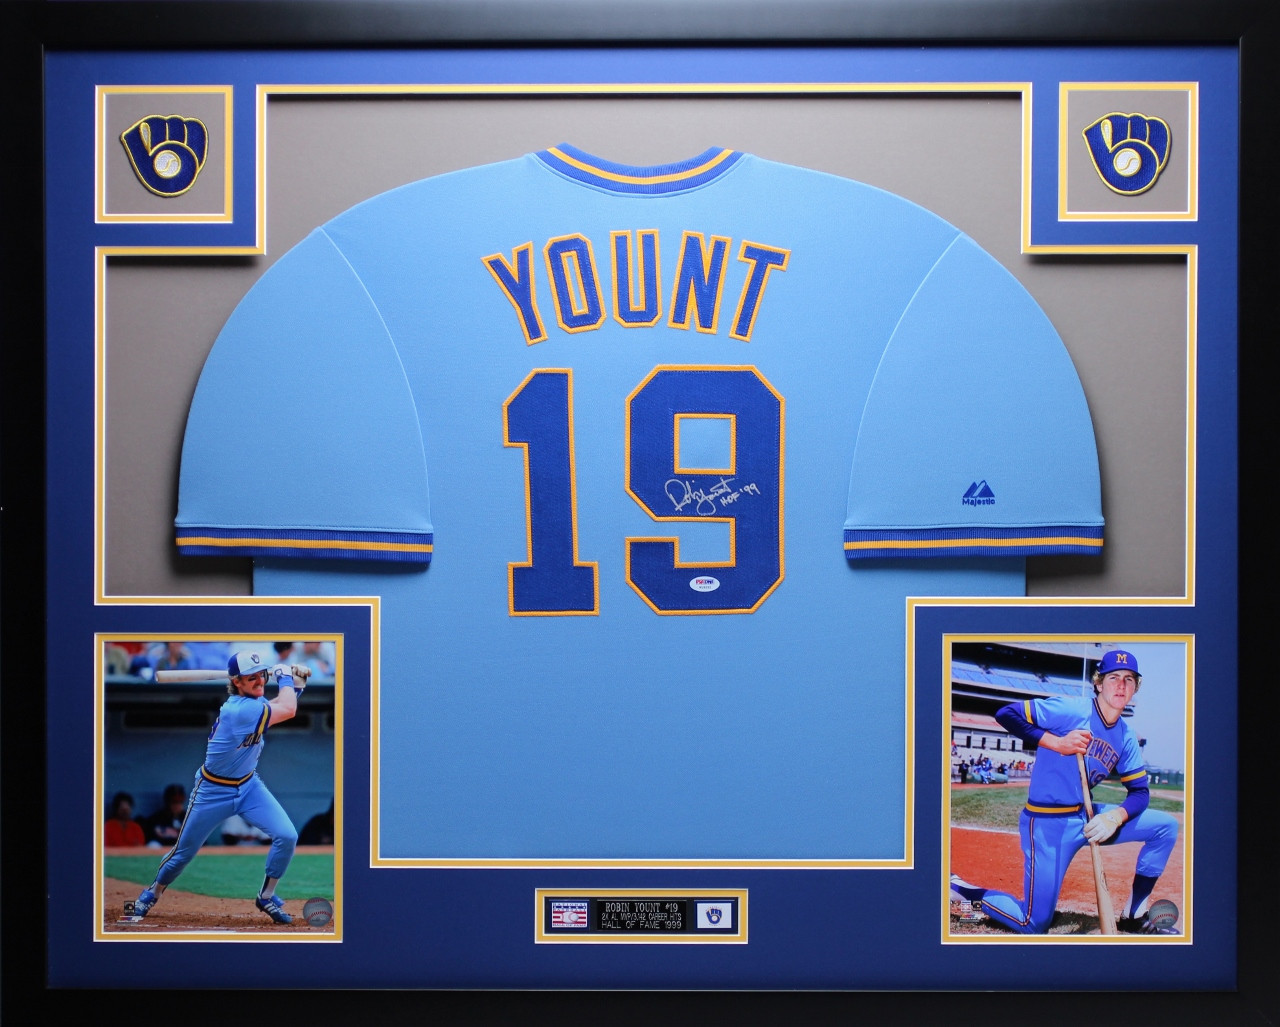 Robin Yount Signed Milwaukee Brewers Jersey